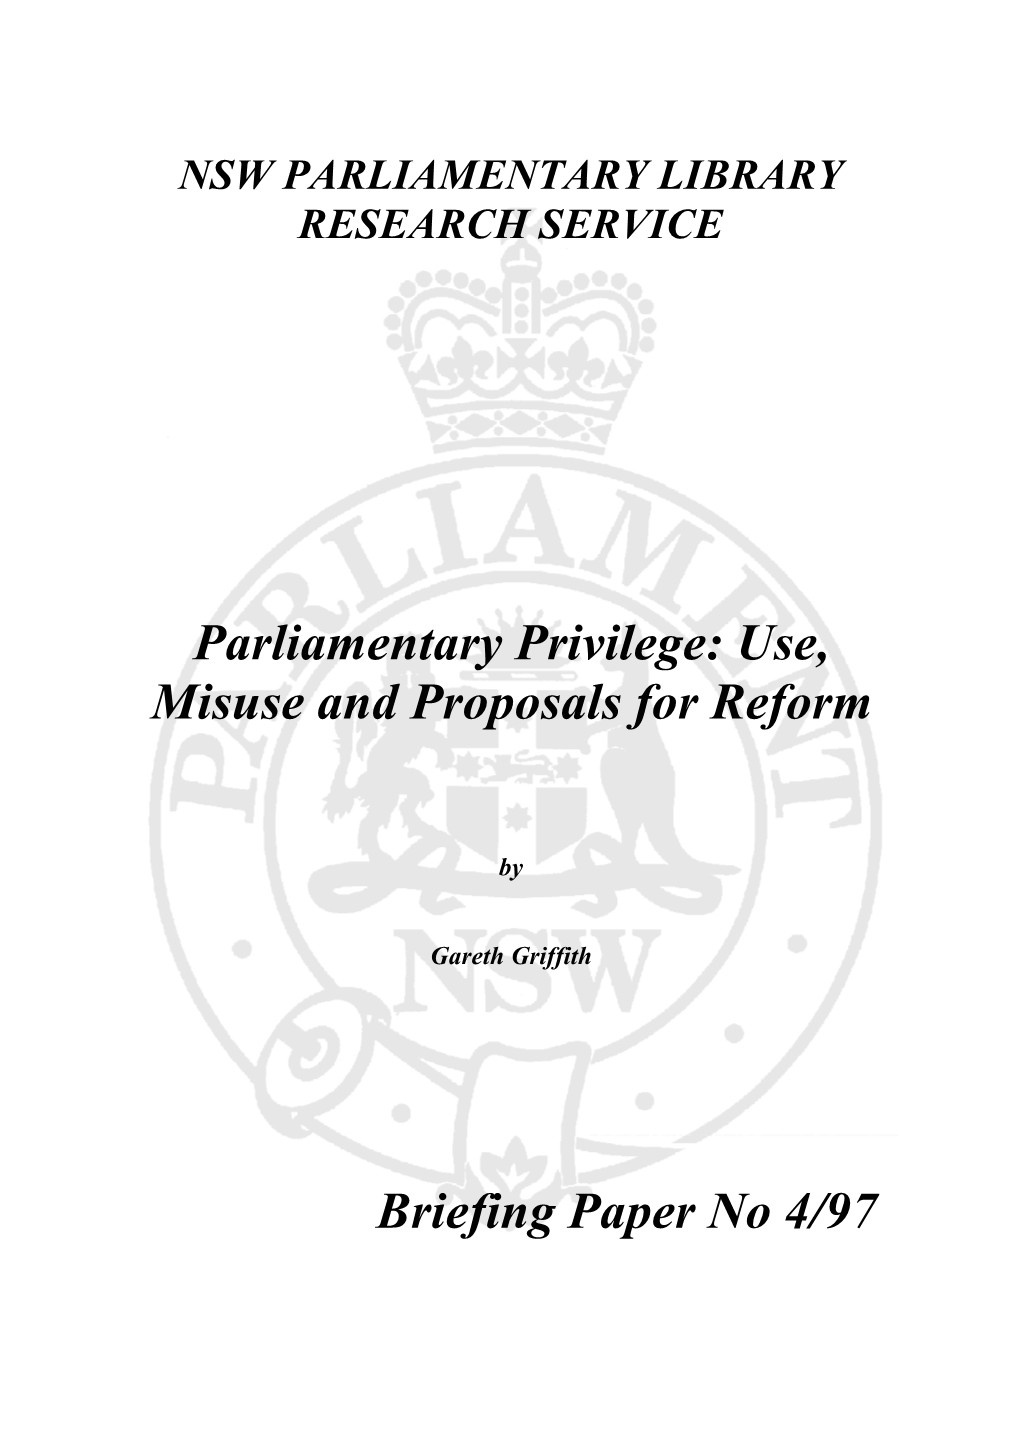 Parliamentary Privilege: Use, Misuse and Proposals for Reform